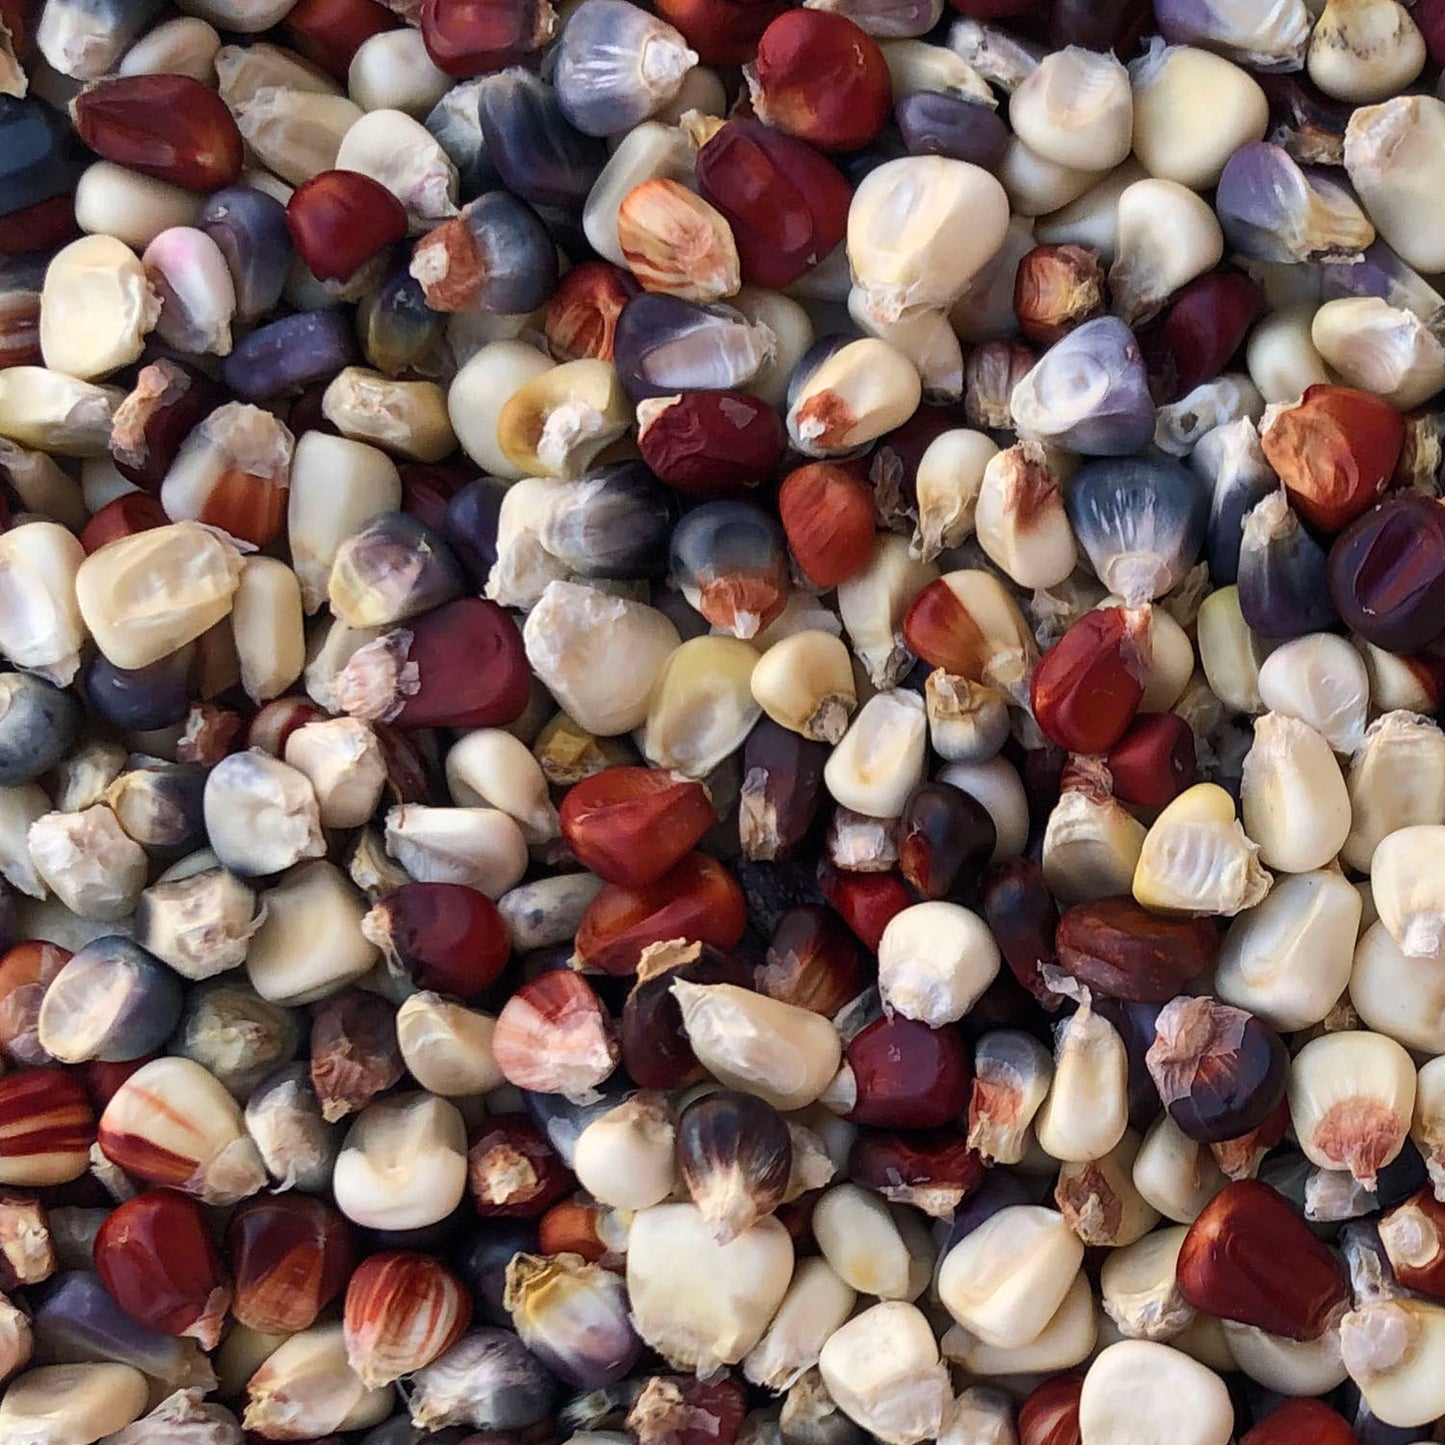 Zea mays.  A beautiful and productive mix of red, white, blue, yellow, orange and chinmark kernels on medium (11") length ears. Great for making chicos, masa, pinole, or polenta.  Originally collected at the Casados Farm in El Guique, New Mexico in 1994. From our Seed Bank Collection.  Origin: high desert, about 5500' elevation Includes mostly flour type kernels, with some flint and dent as well Plants grow to about 6 feet Seed Saver Size includes info on corn pollination and seed saving details. 